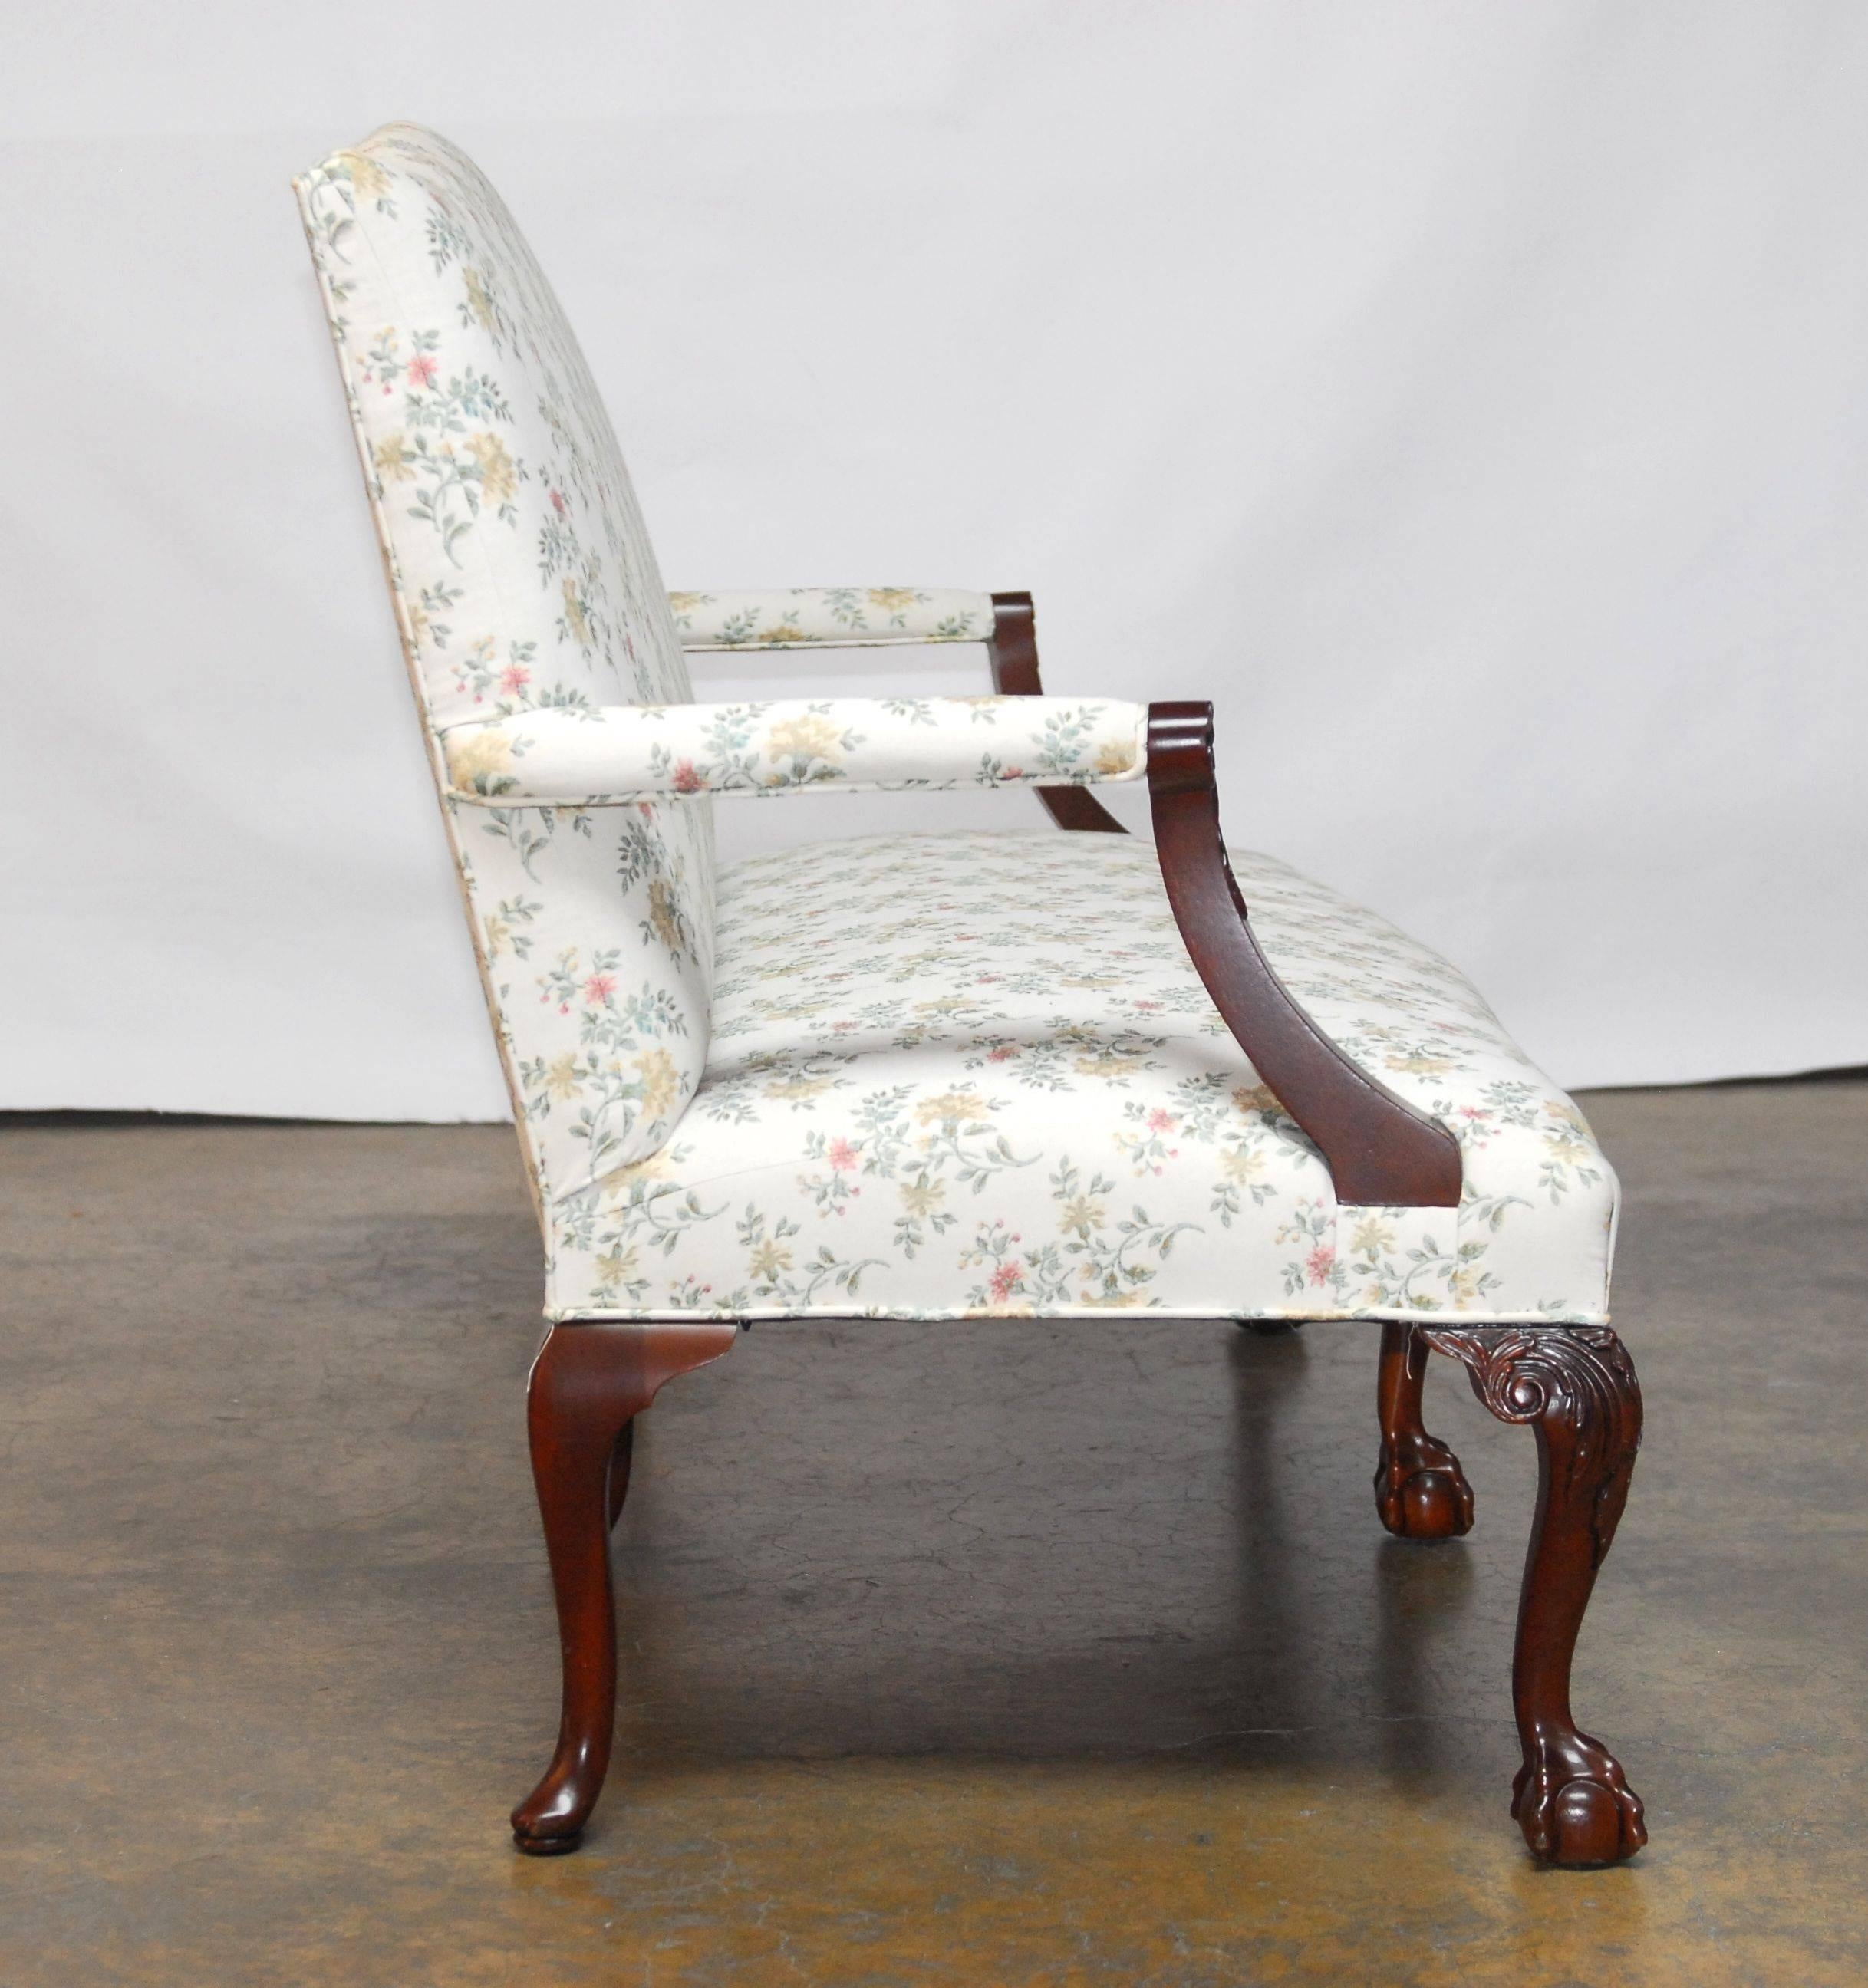 Distinctive mahogany settee made in the George II taste featuring six cabriole legs with the front carved in the Thomas Chippendale Ball and Claw style. The settee has a serpentine crest and bow front and is upholstered in a floral print over a